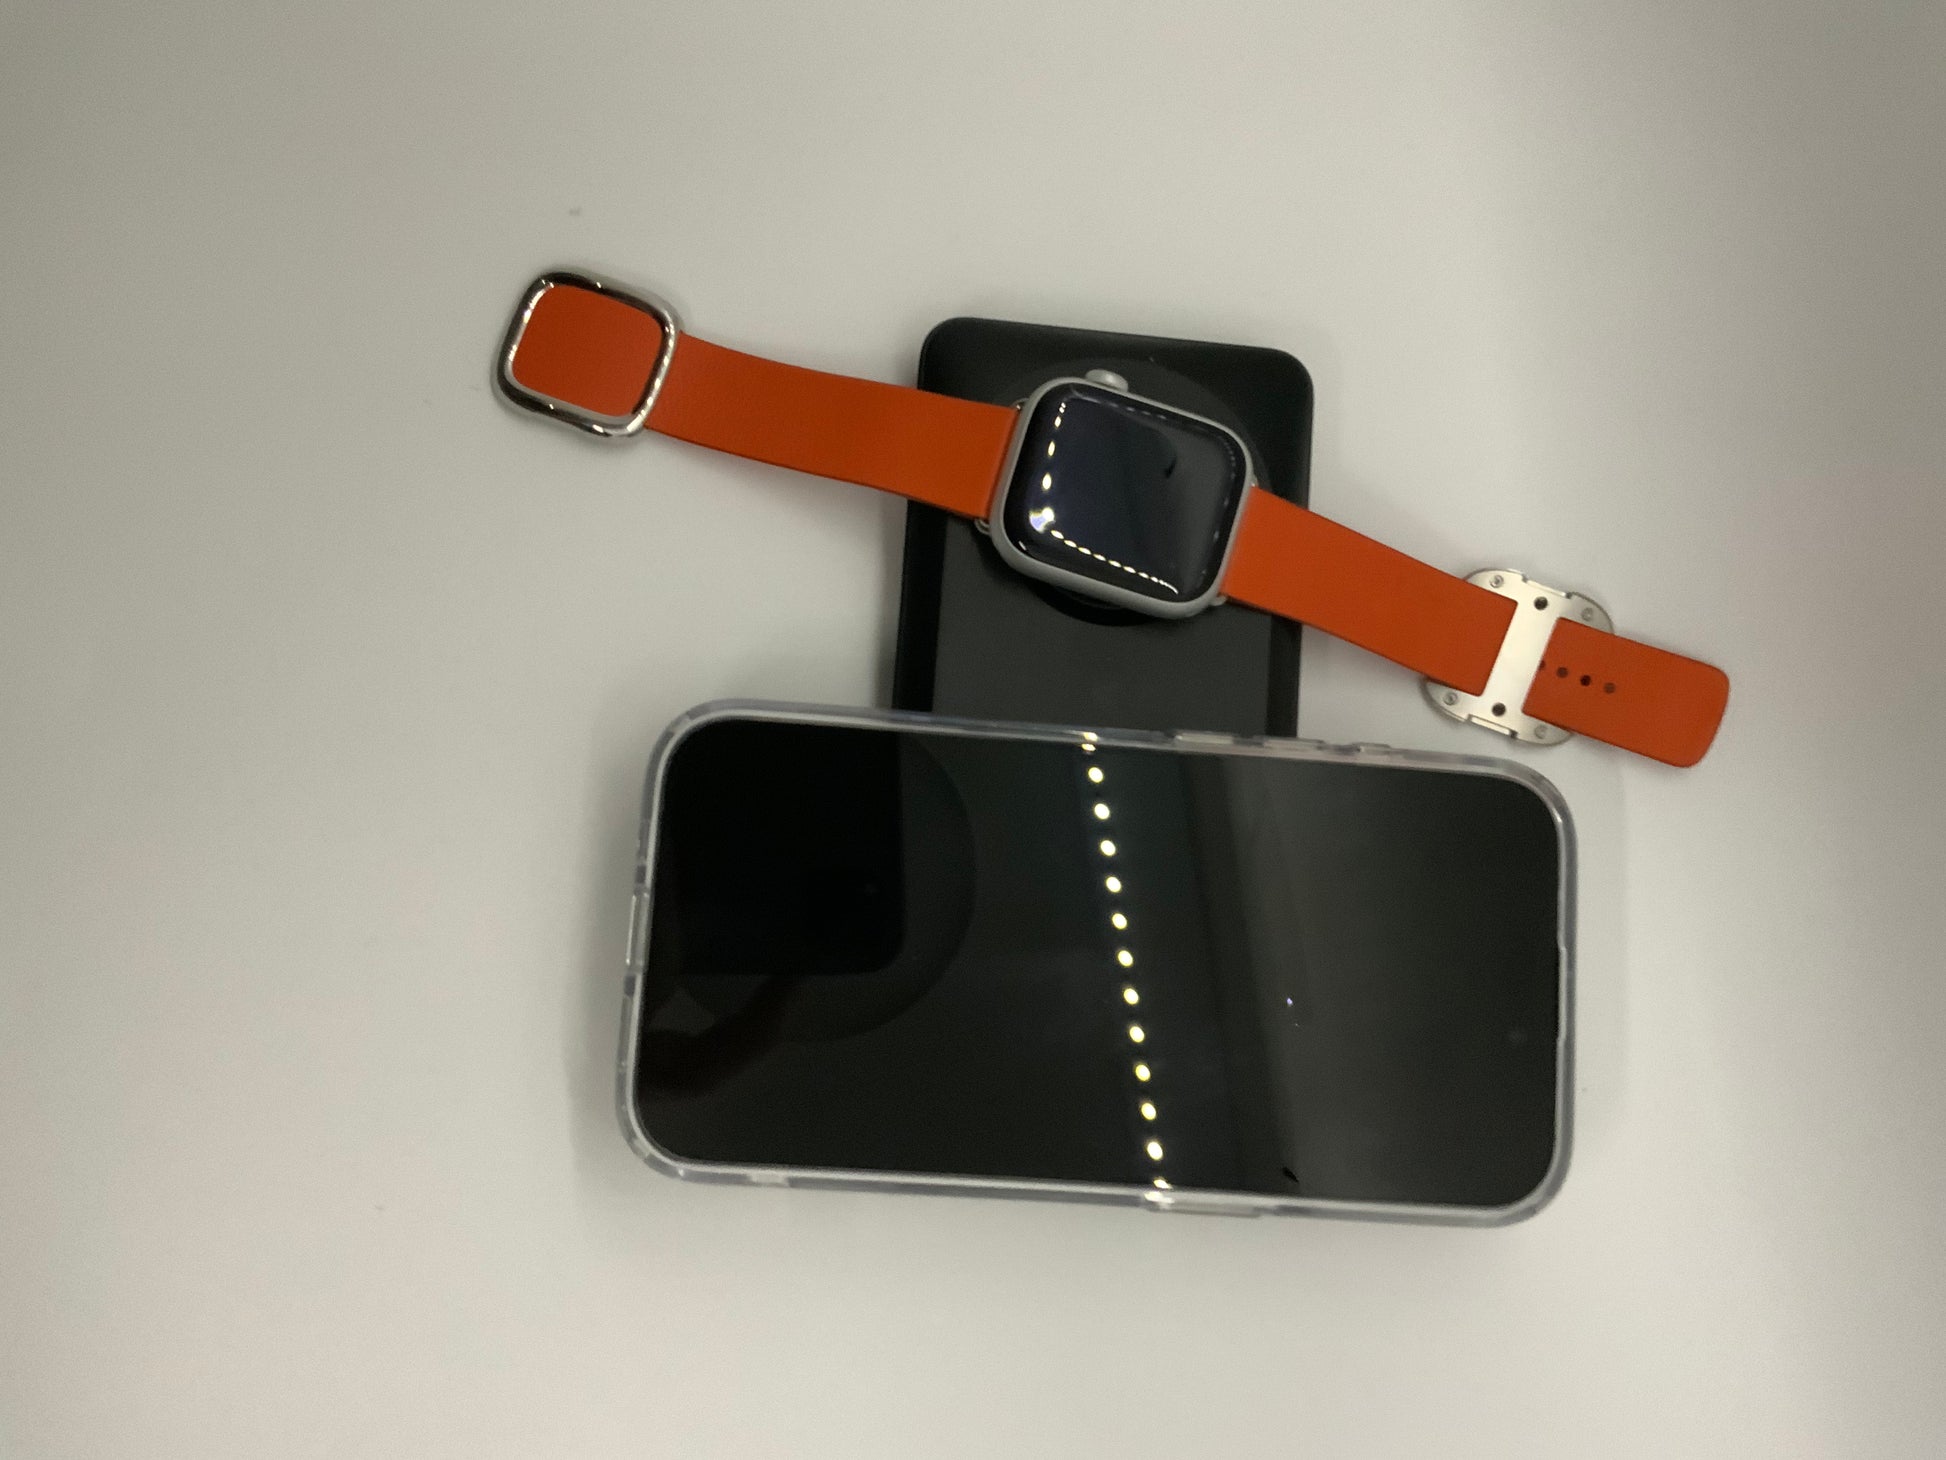 The picture shows a few electronic devices and a watch on a light-colored surface. There is a smartphone with a black screen and silver edges at the bottom. Above the smartphone, there is a smartwatch with an orange strap and a silver rectangular face. The watch is placed on top of what appears to be a black tablet or another smartphone. The background is plain and light-colored.